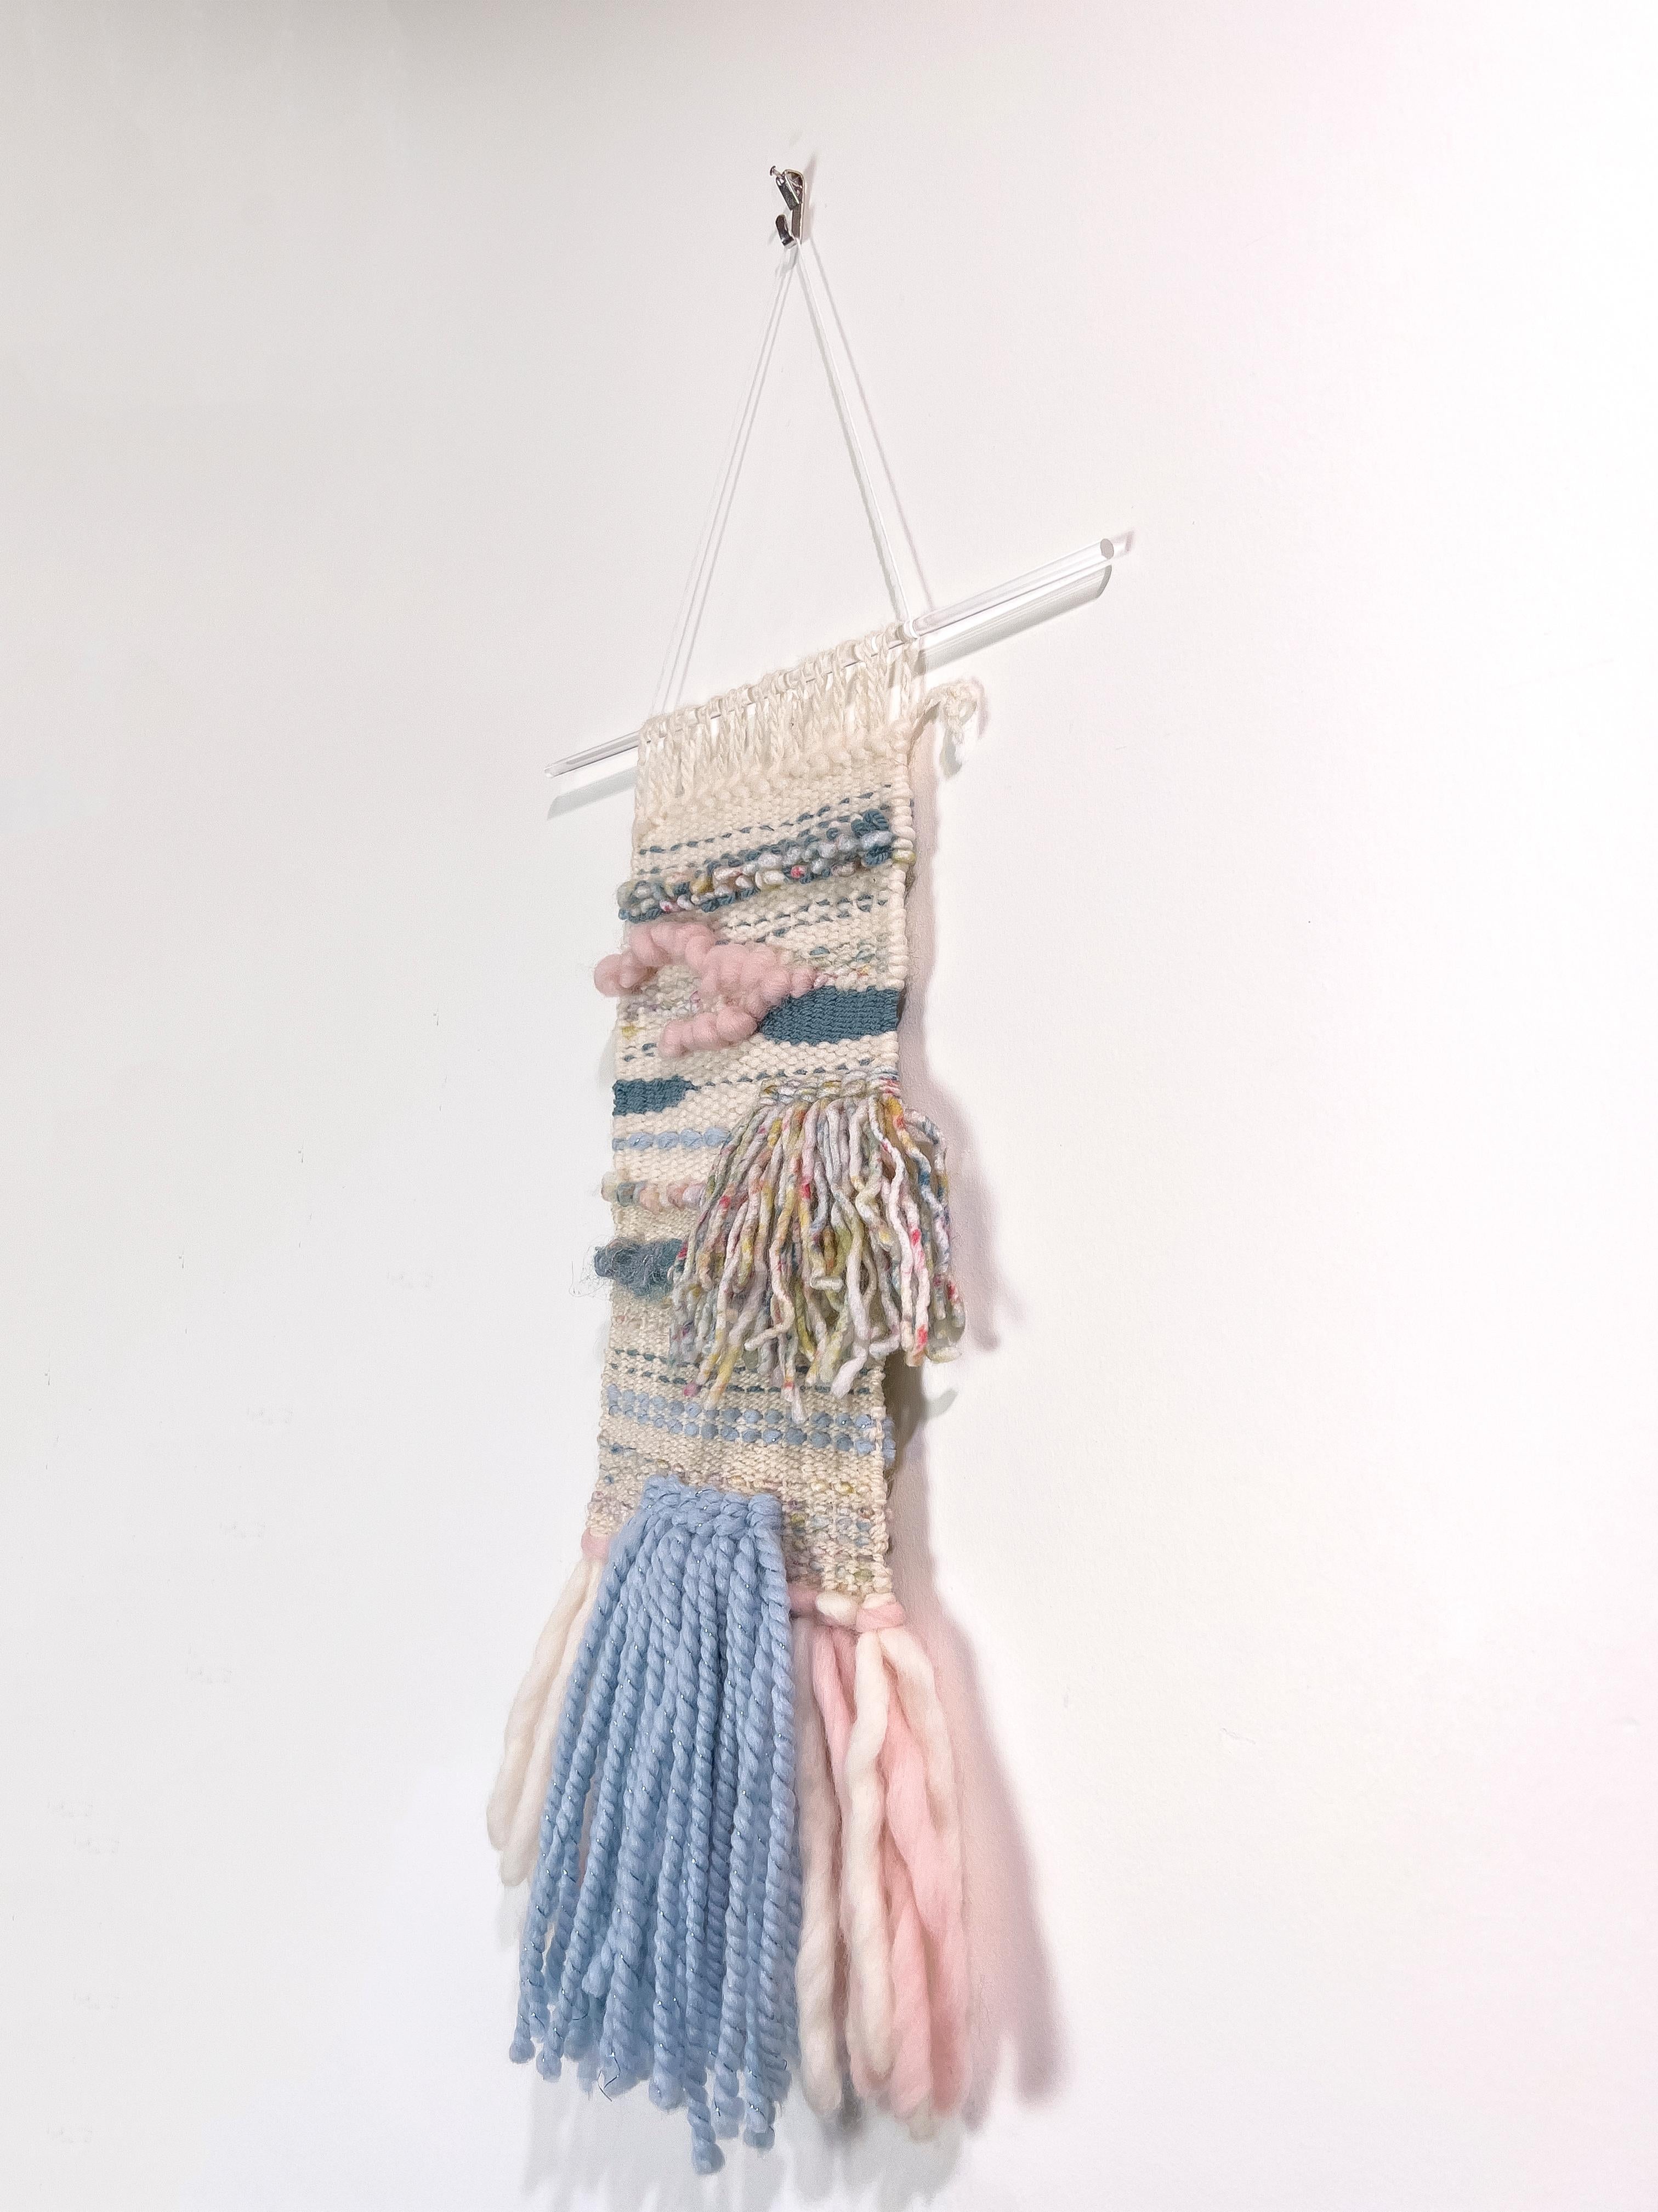 This hand-woven fiber art wall hanging by Dolores Tema is made with cotton and Alpaca and Merino wool. It features layers of woven yarn in varying colors including cream, muted pink, and muted blue and teal. The weaving hangs from a clear acrylic